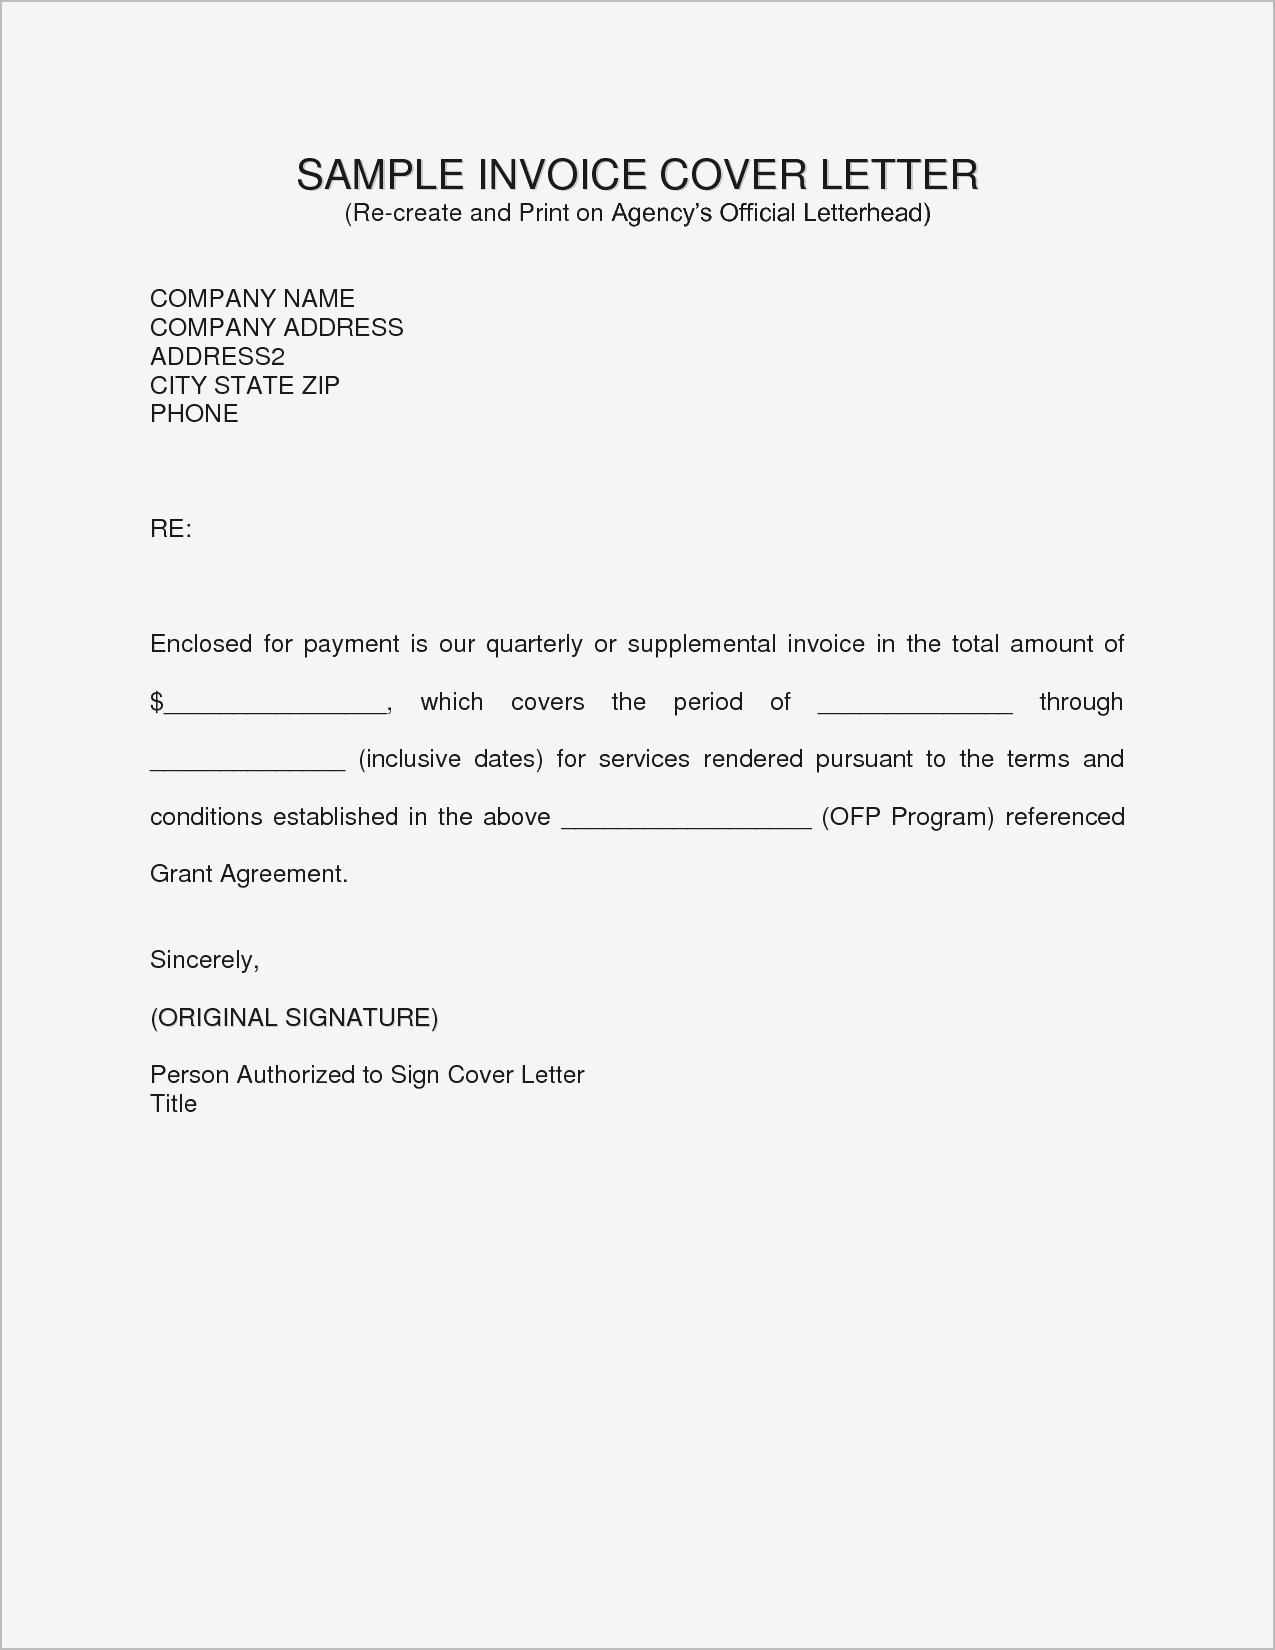 Proof Of Residency Letter Template - Proof Residency Letter Template From Landlord Best Letter